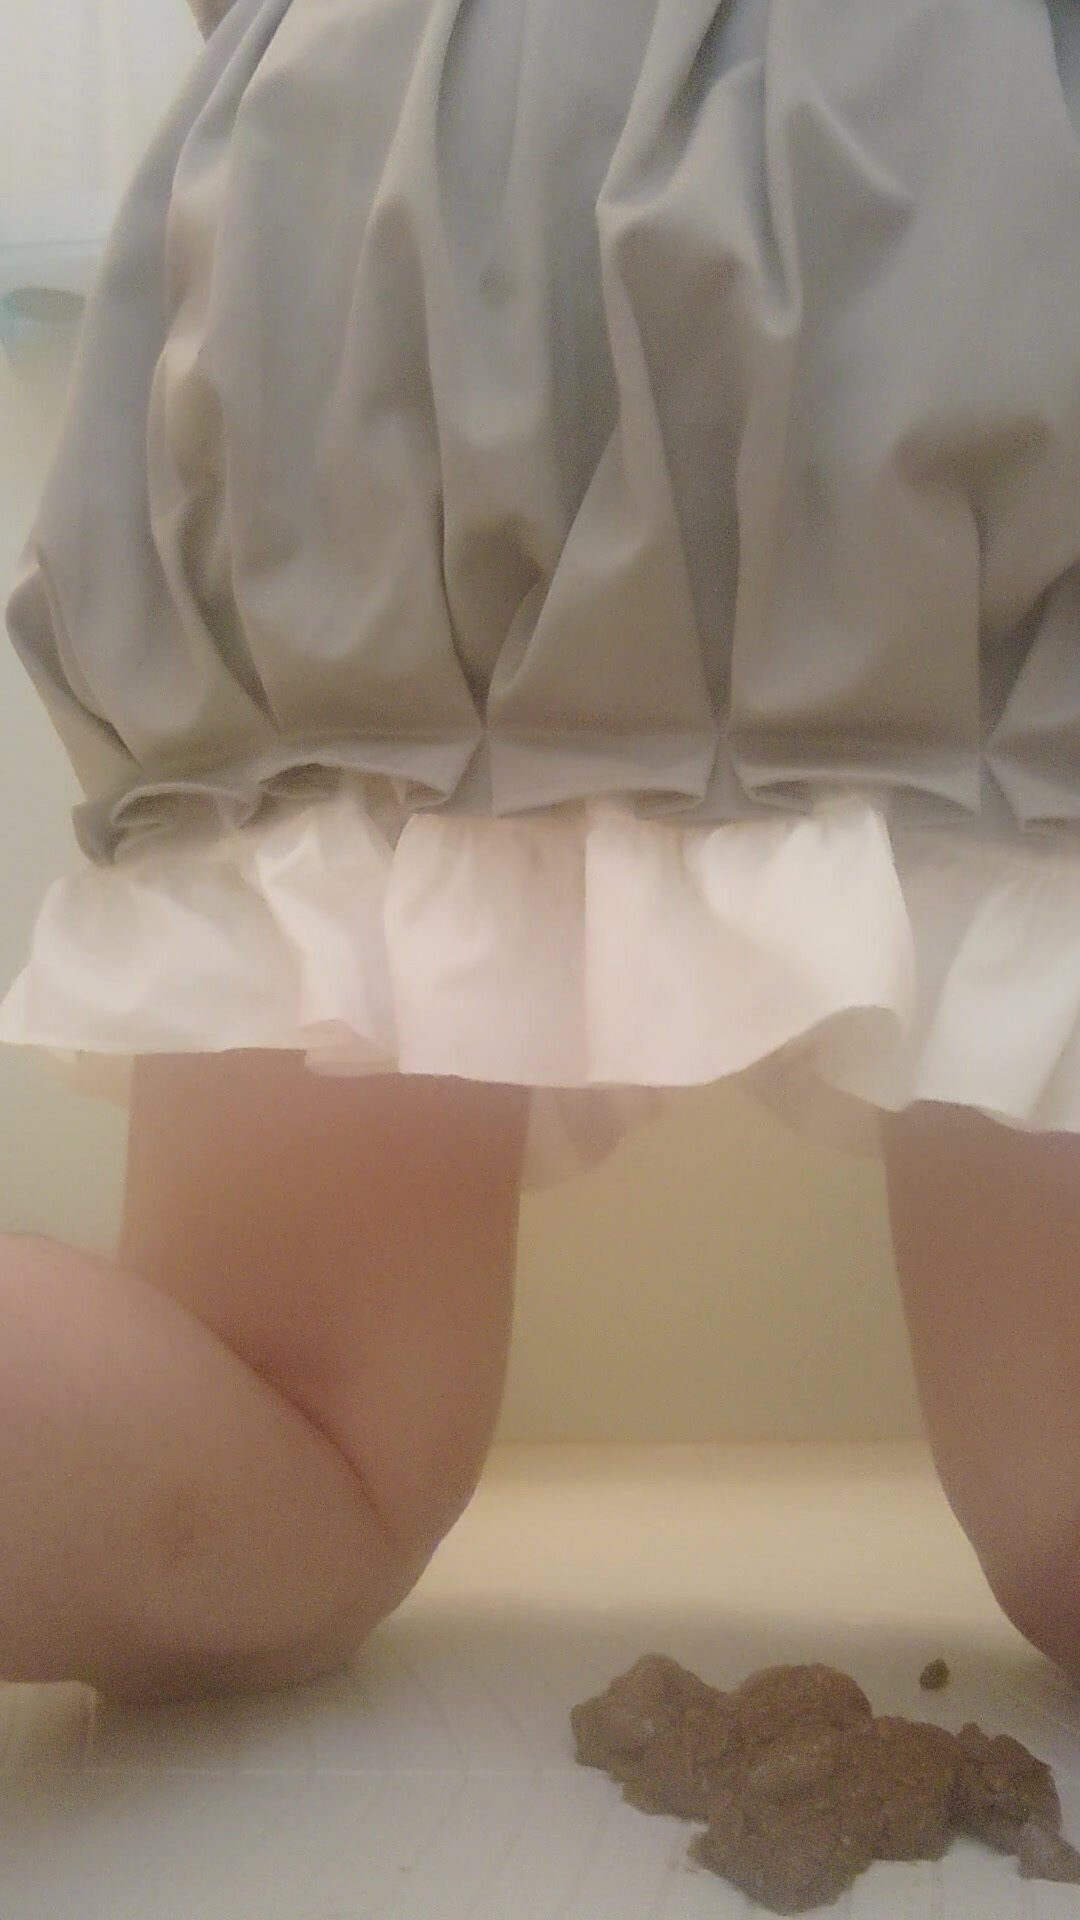 soft pooping - video 3